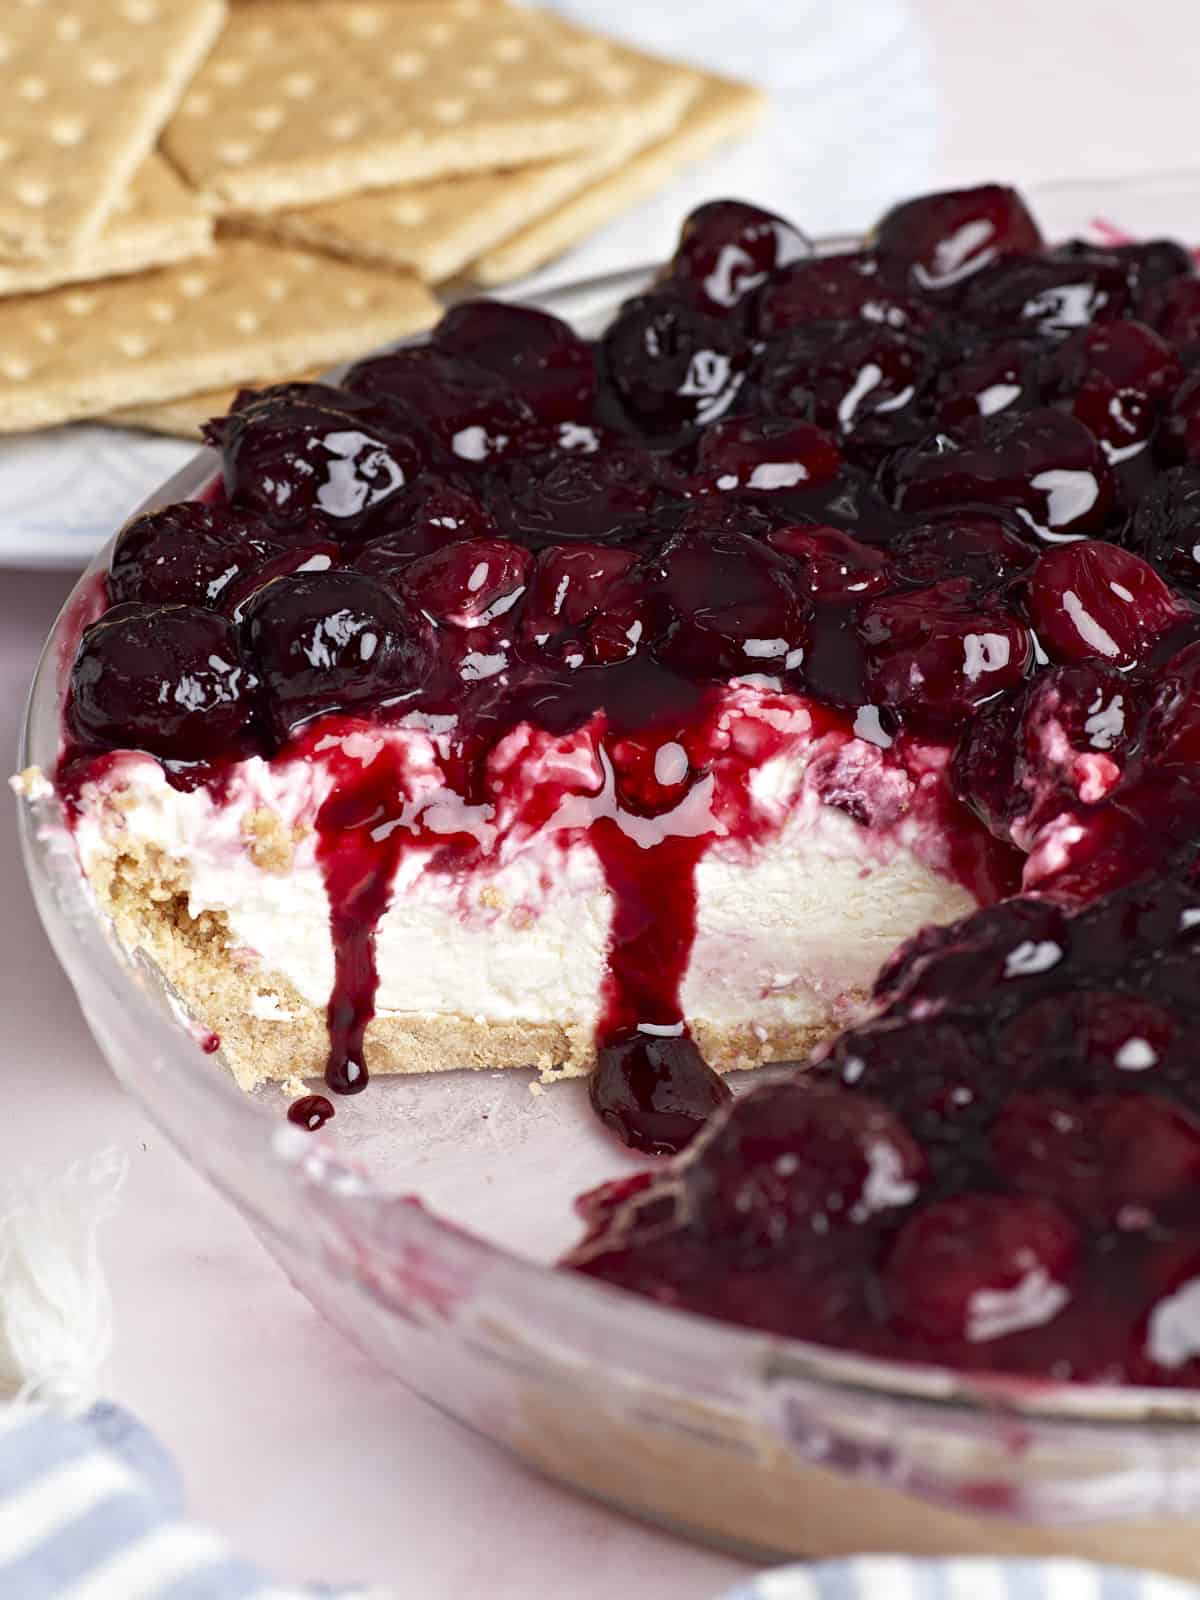 Side view of a no bake cheesecake with cherries on top, one slice removed.